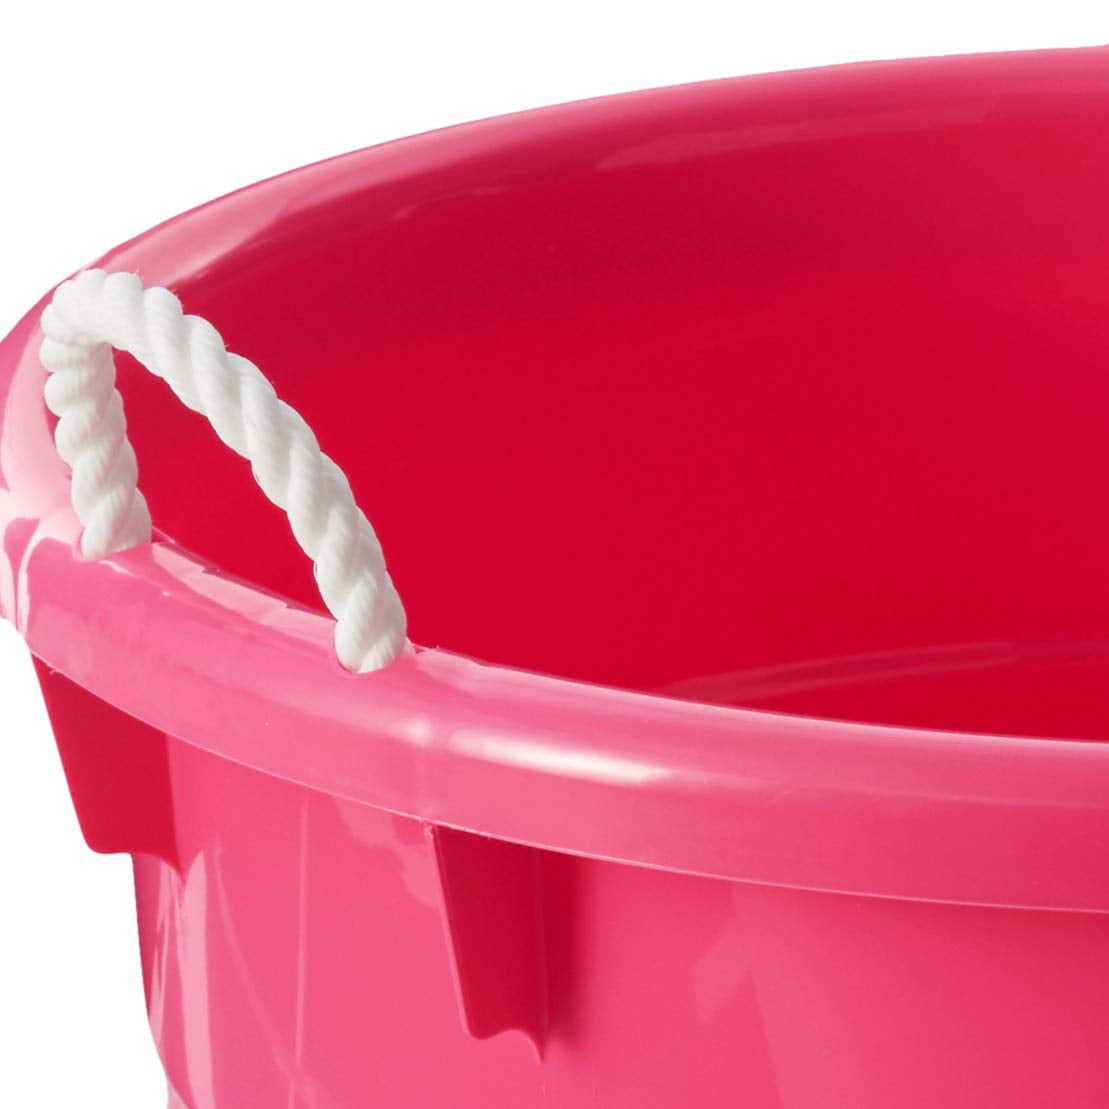 plastic toy bin with rope handles